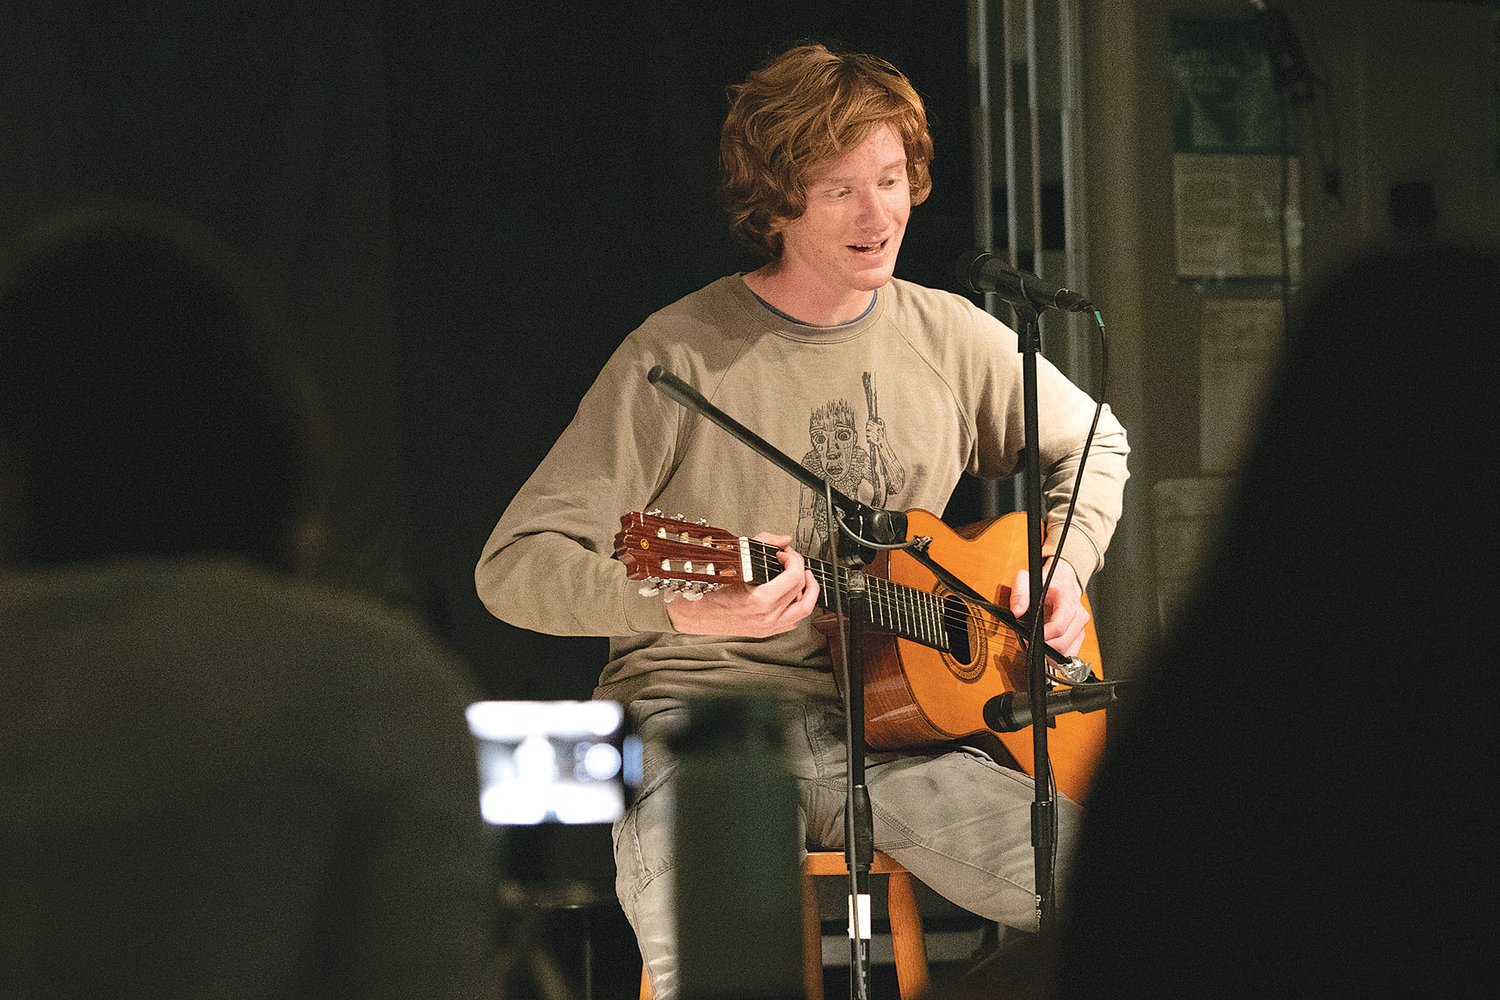 Henry Scott performs during Mt. Hope’s open-mic night.